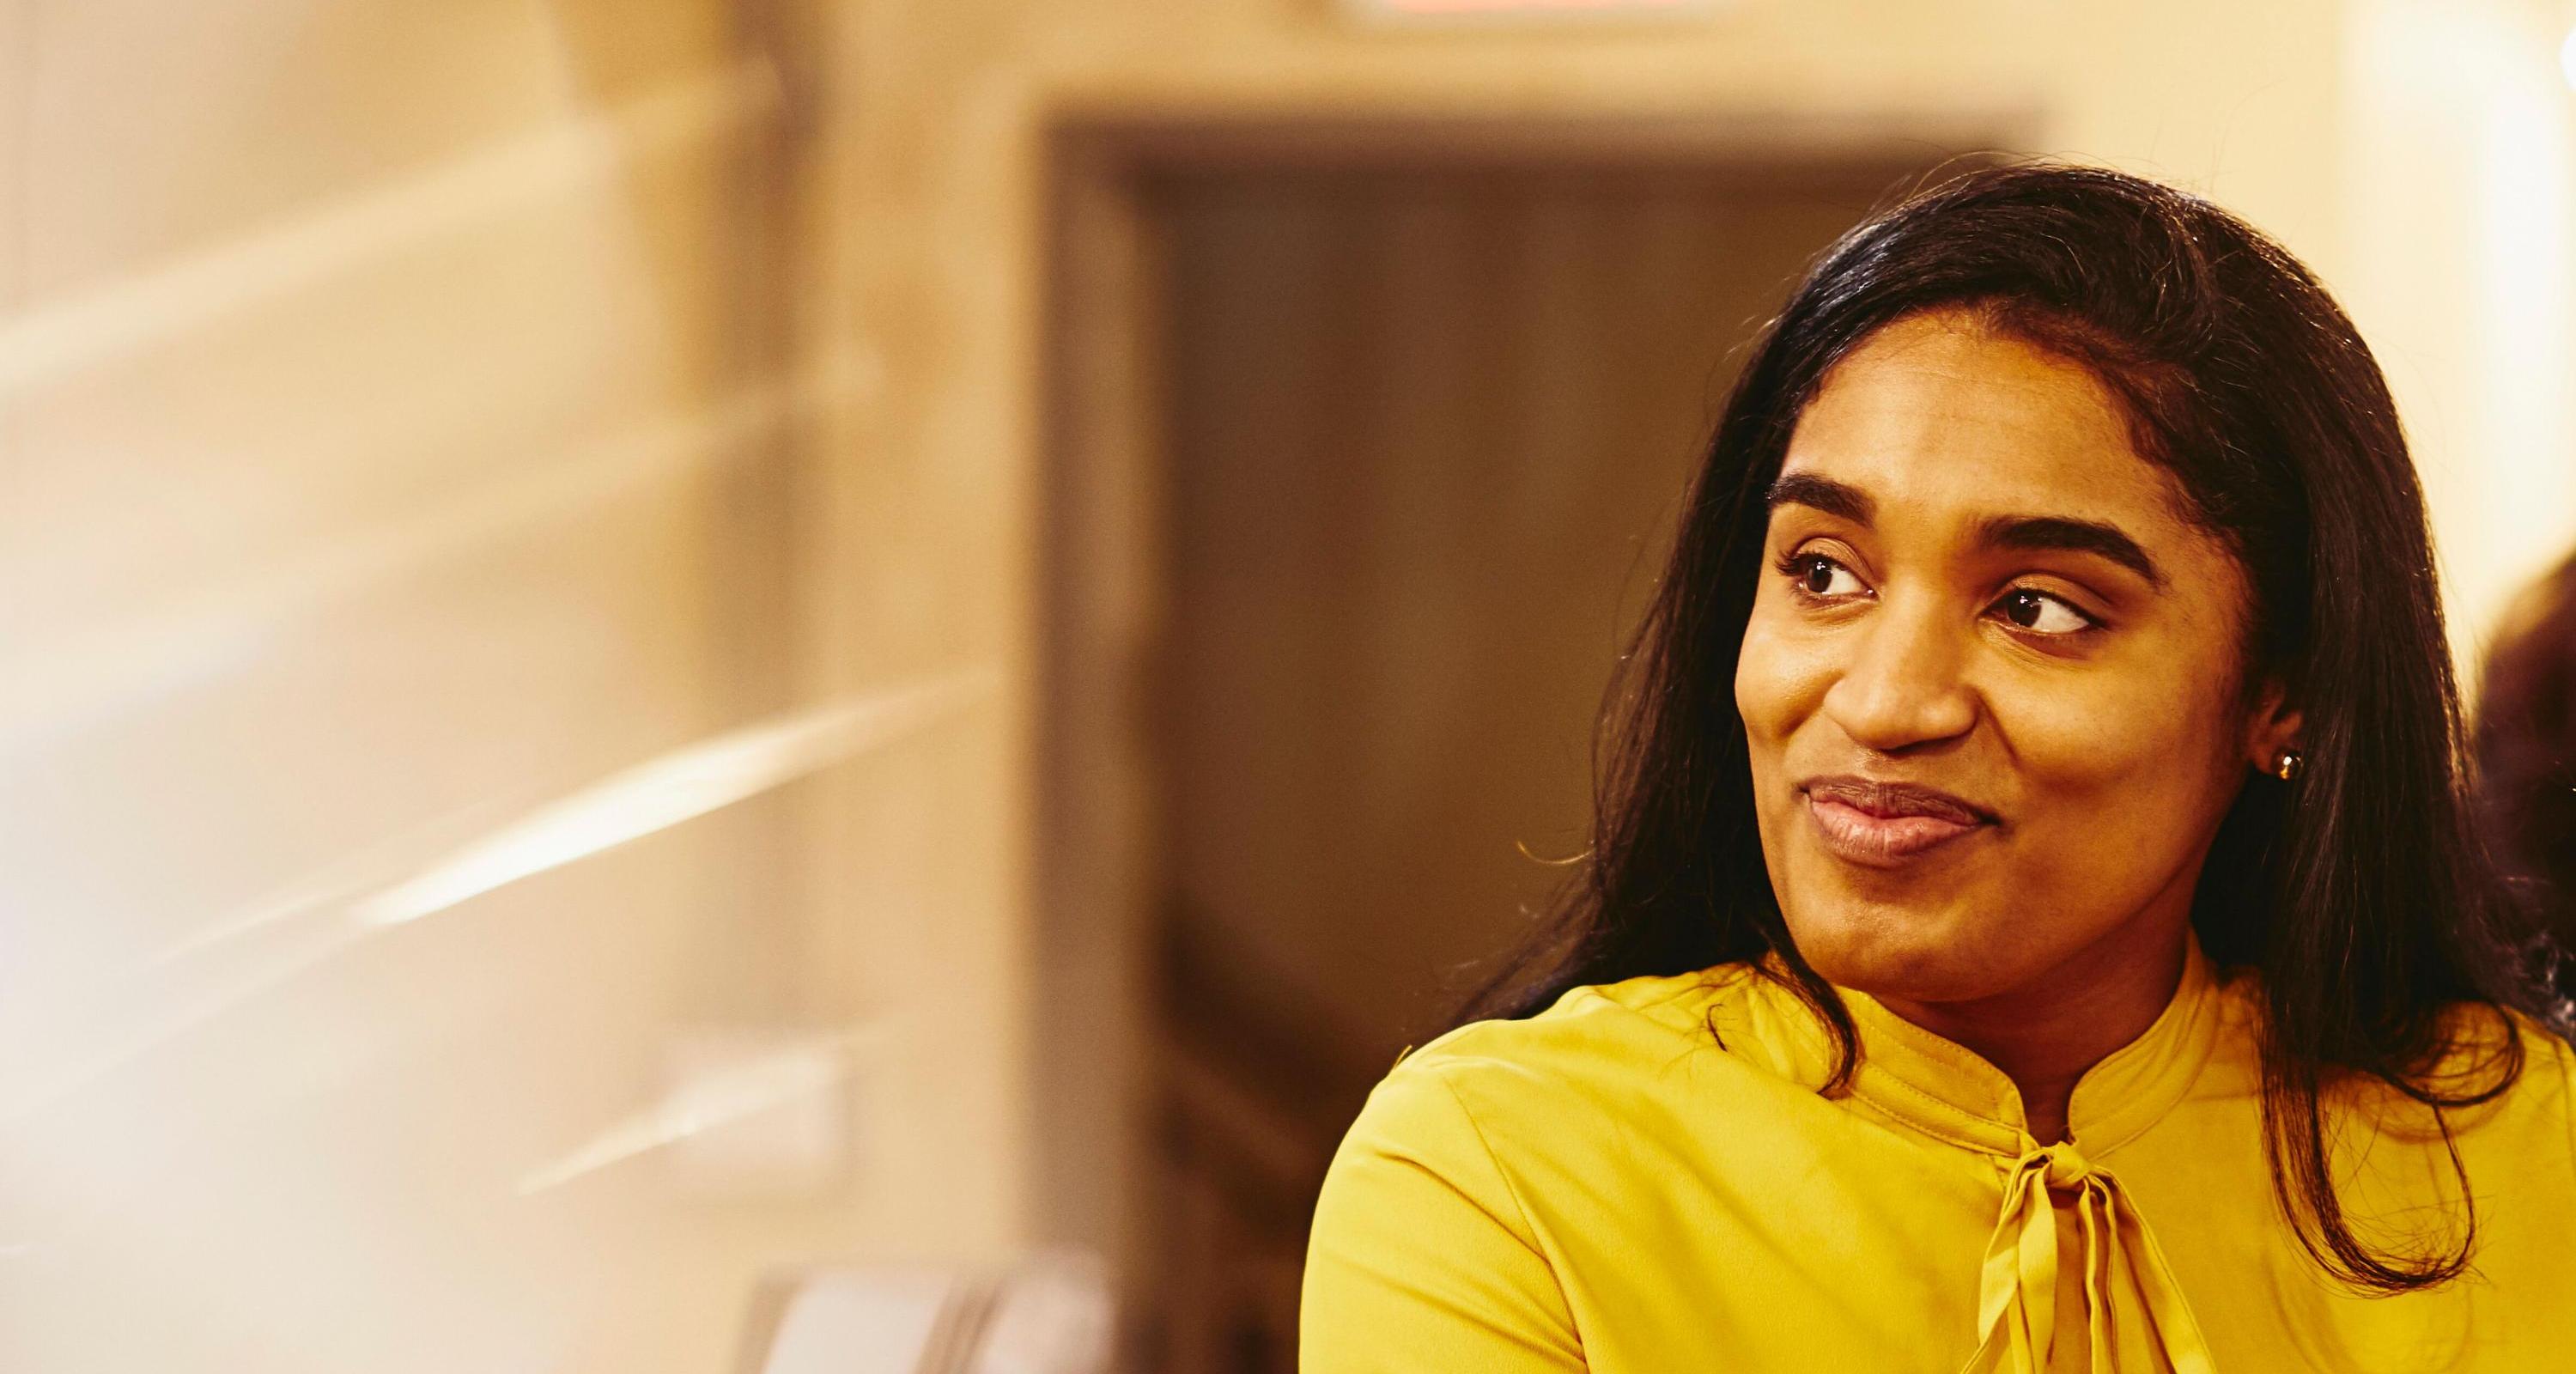 a woman wearing a yellow top smiling